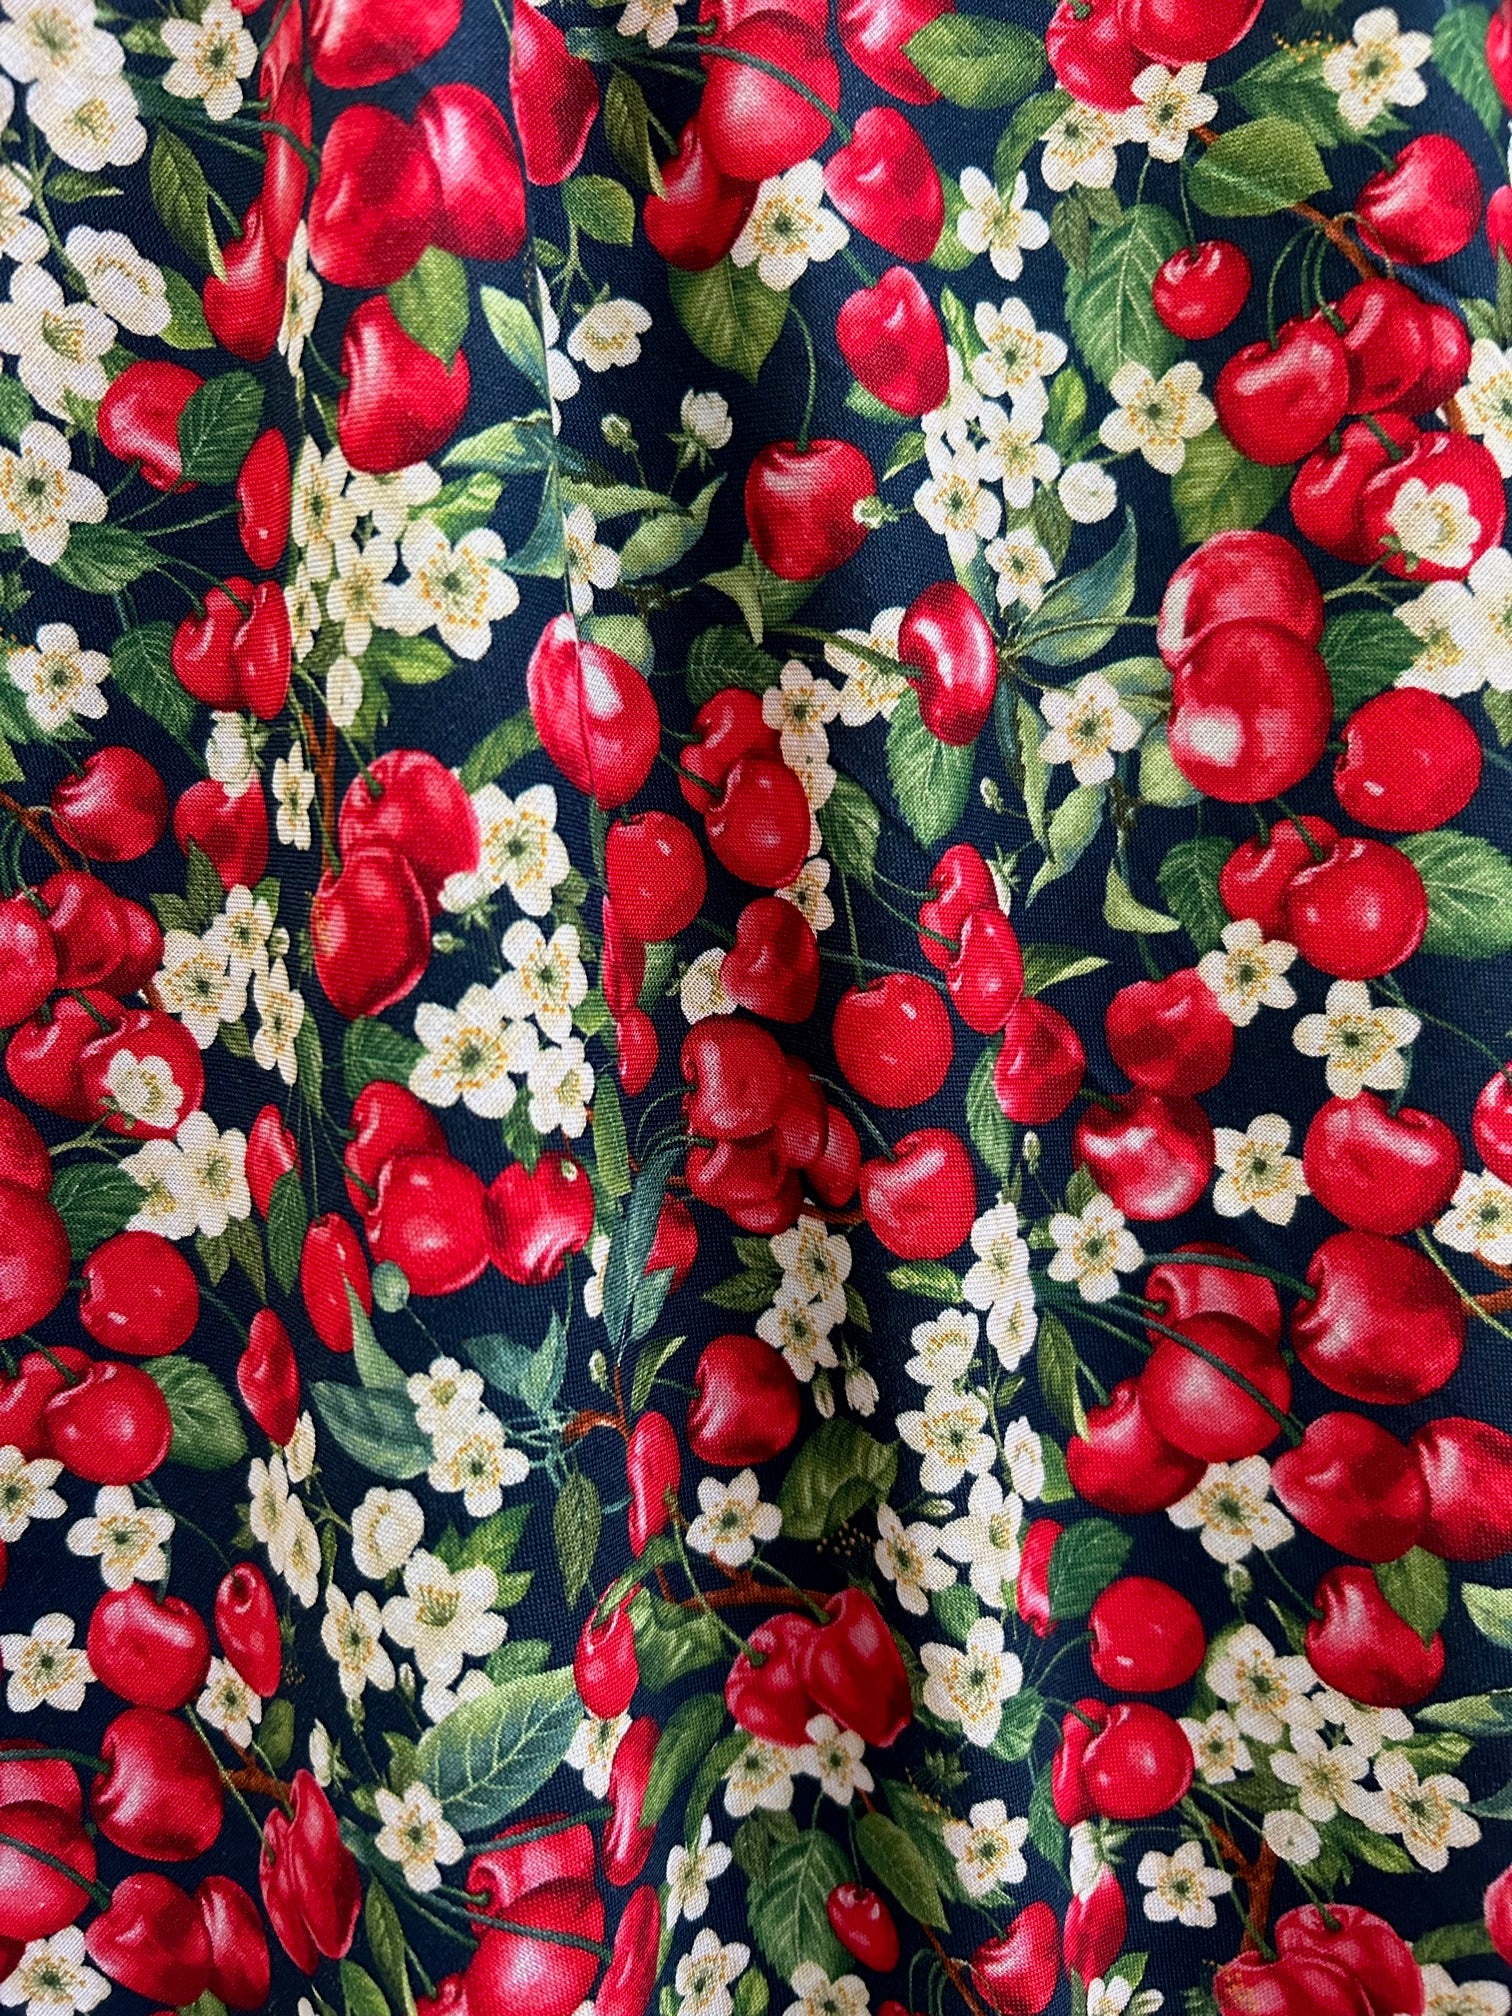 a close up of the fabric of the cherry good vintage dress showing tossed cherries and cherry blossoms 